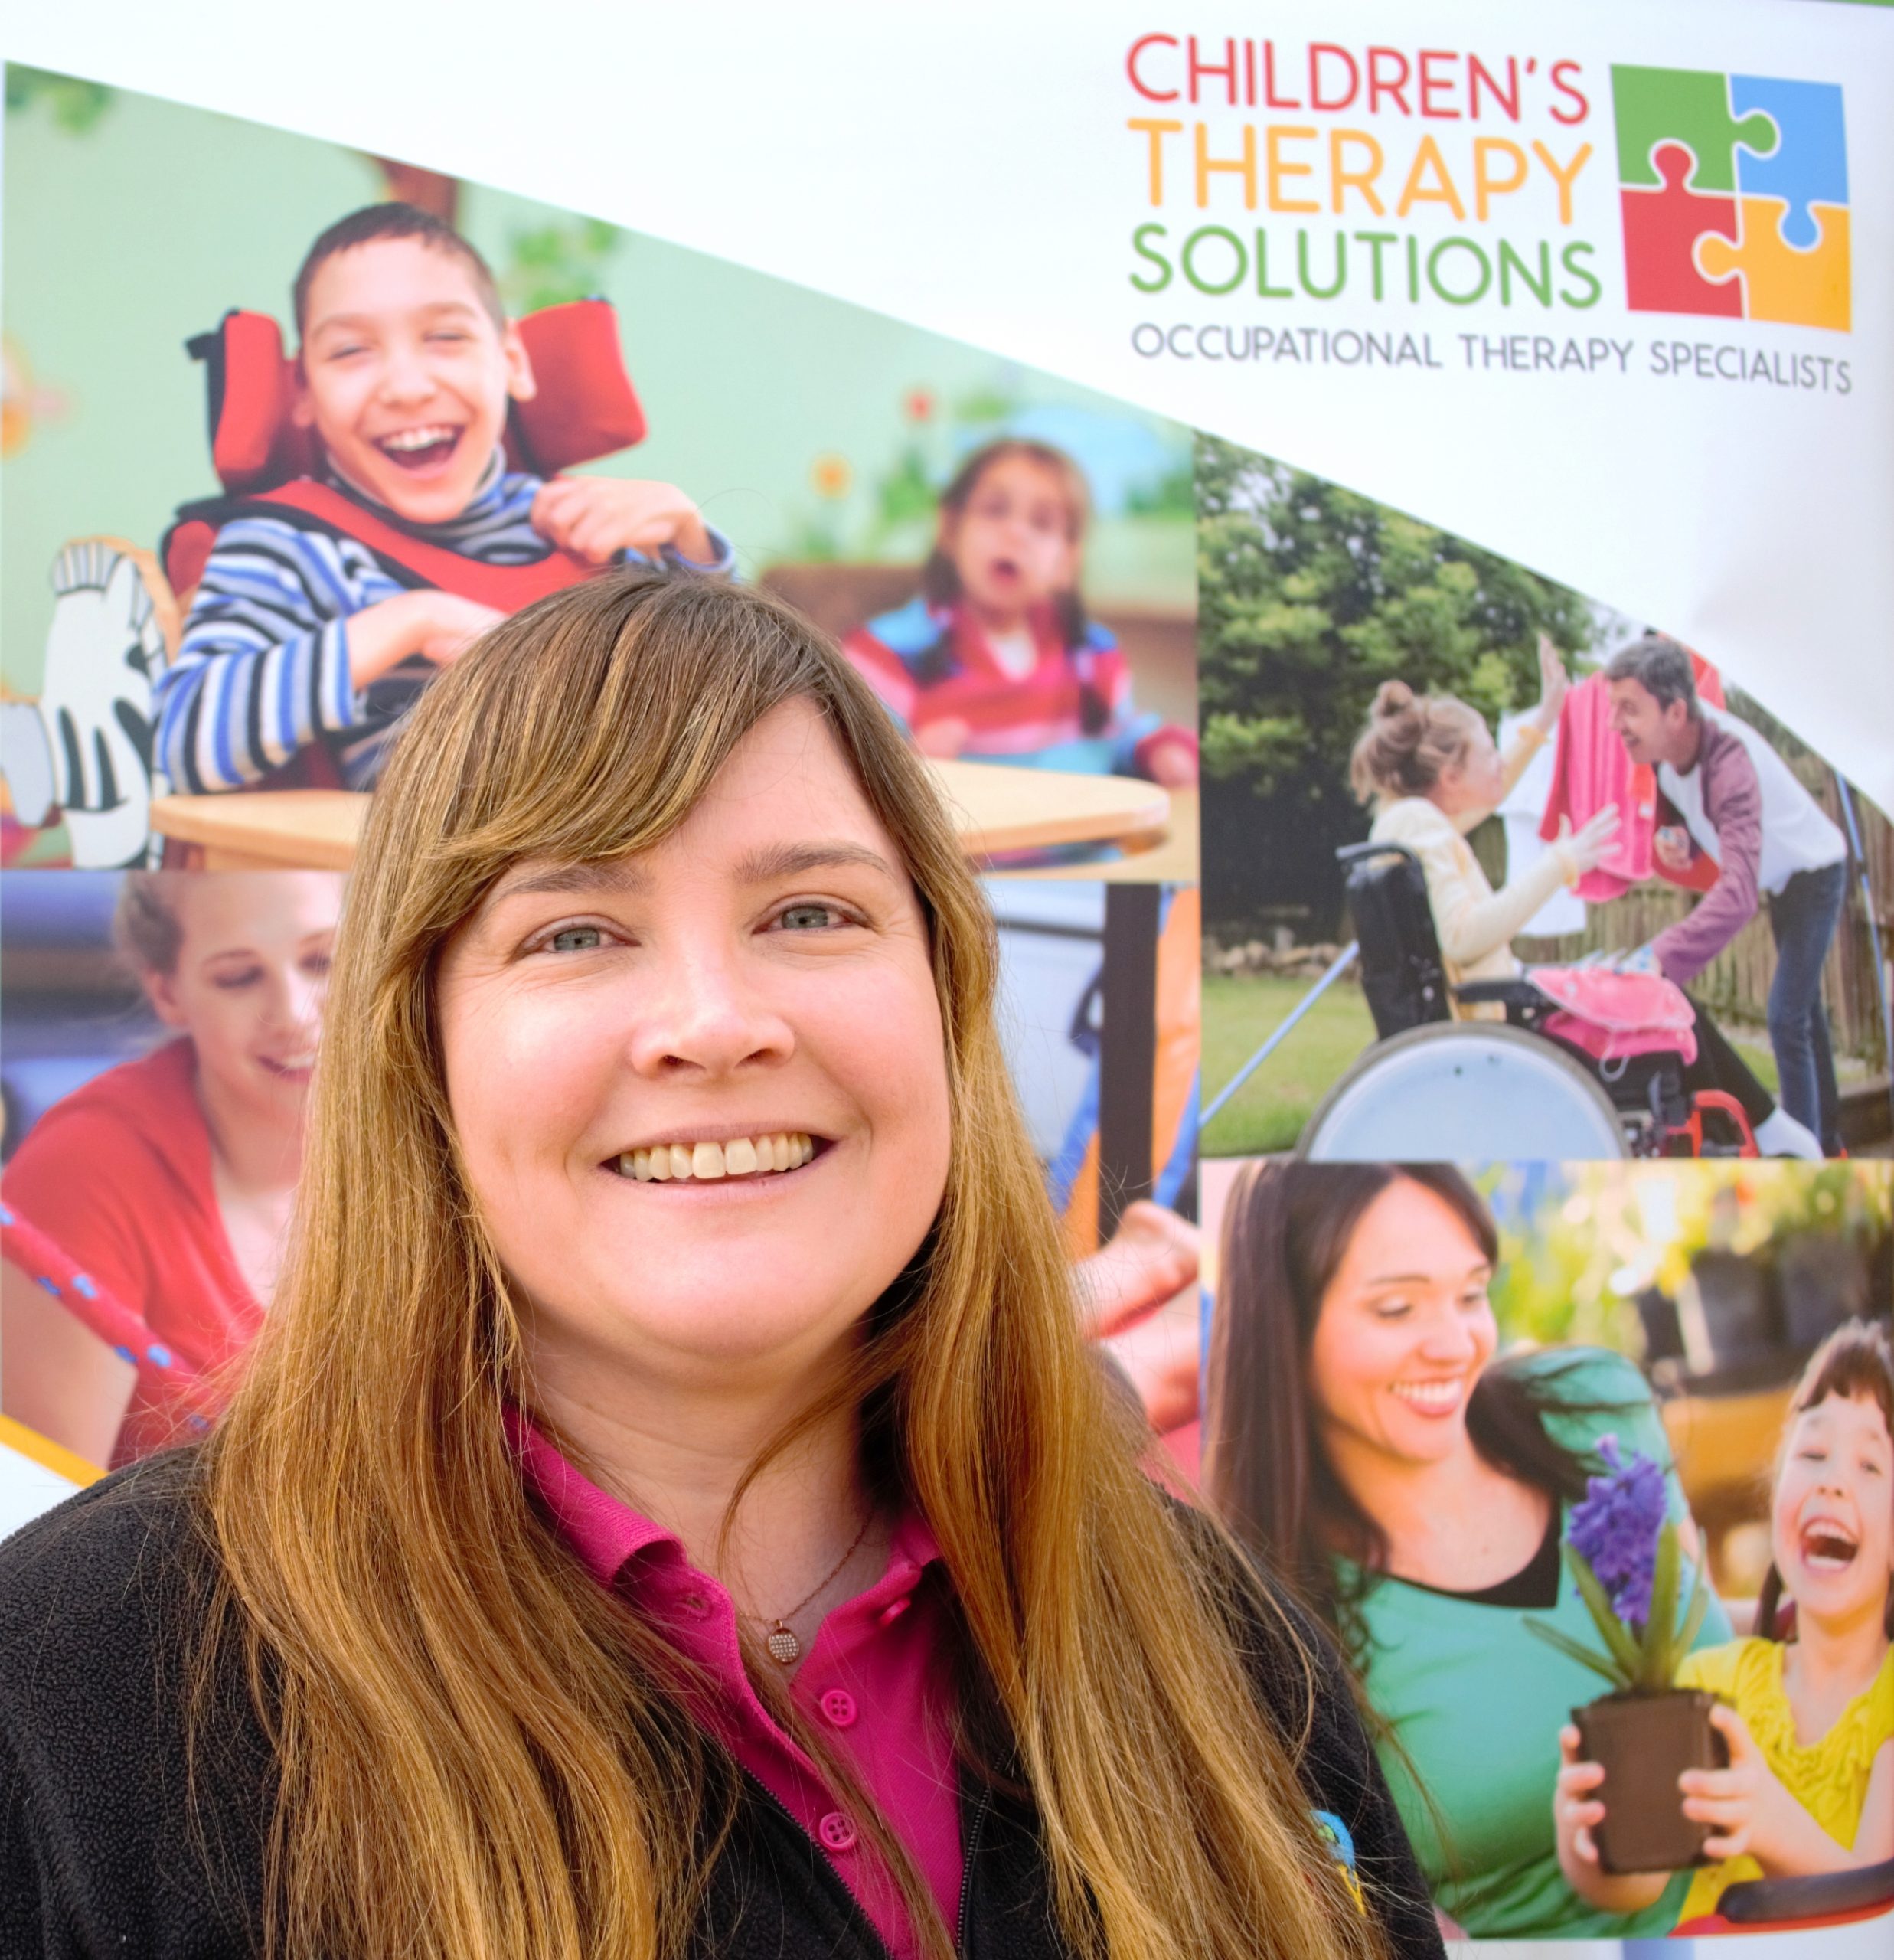 Elaine - Children's Therapy Solutions Ltd.